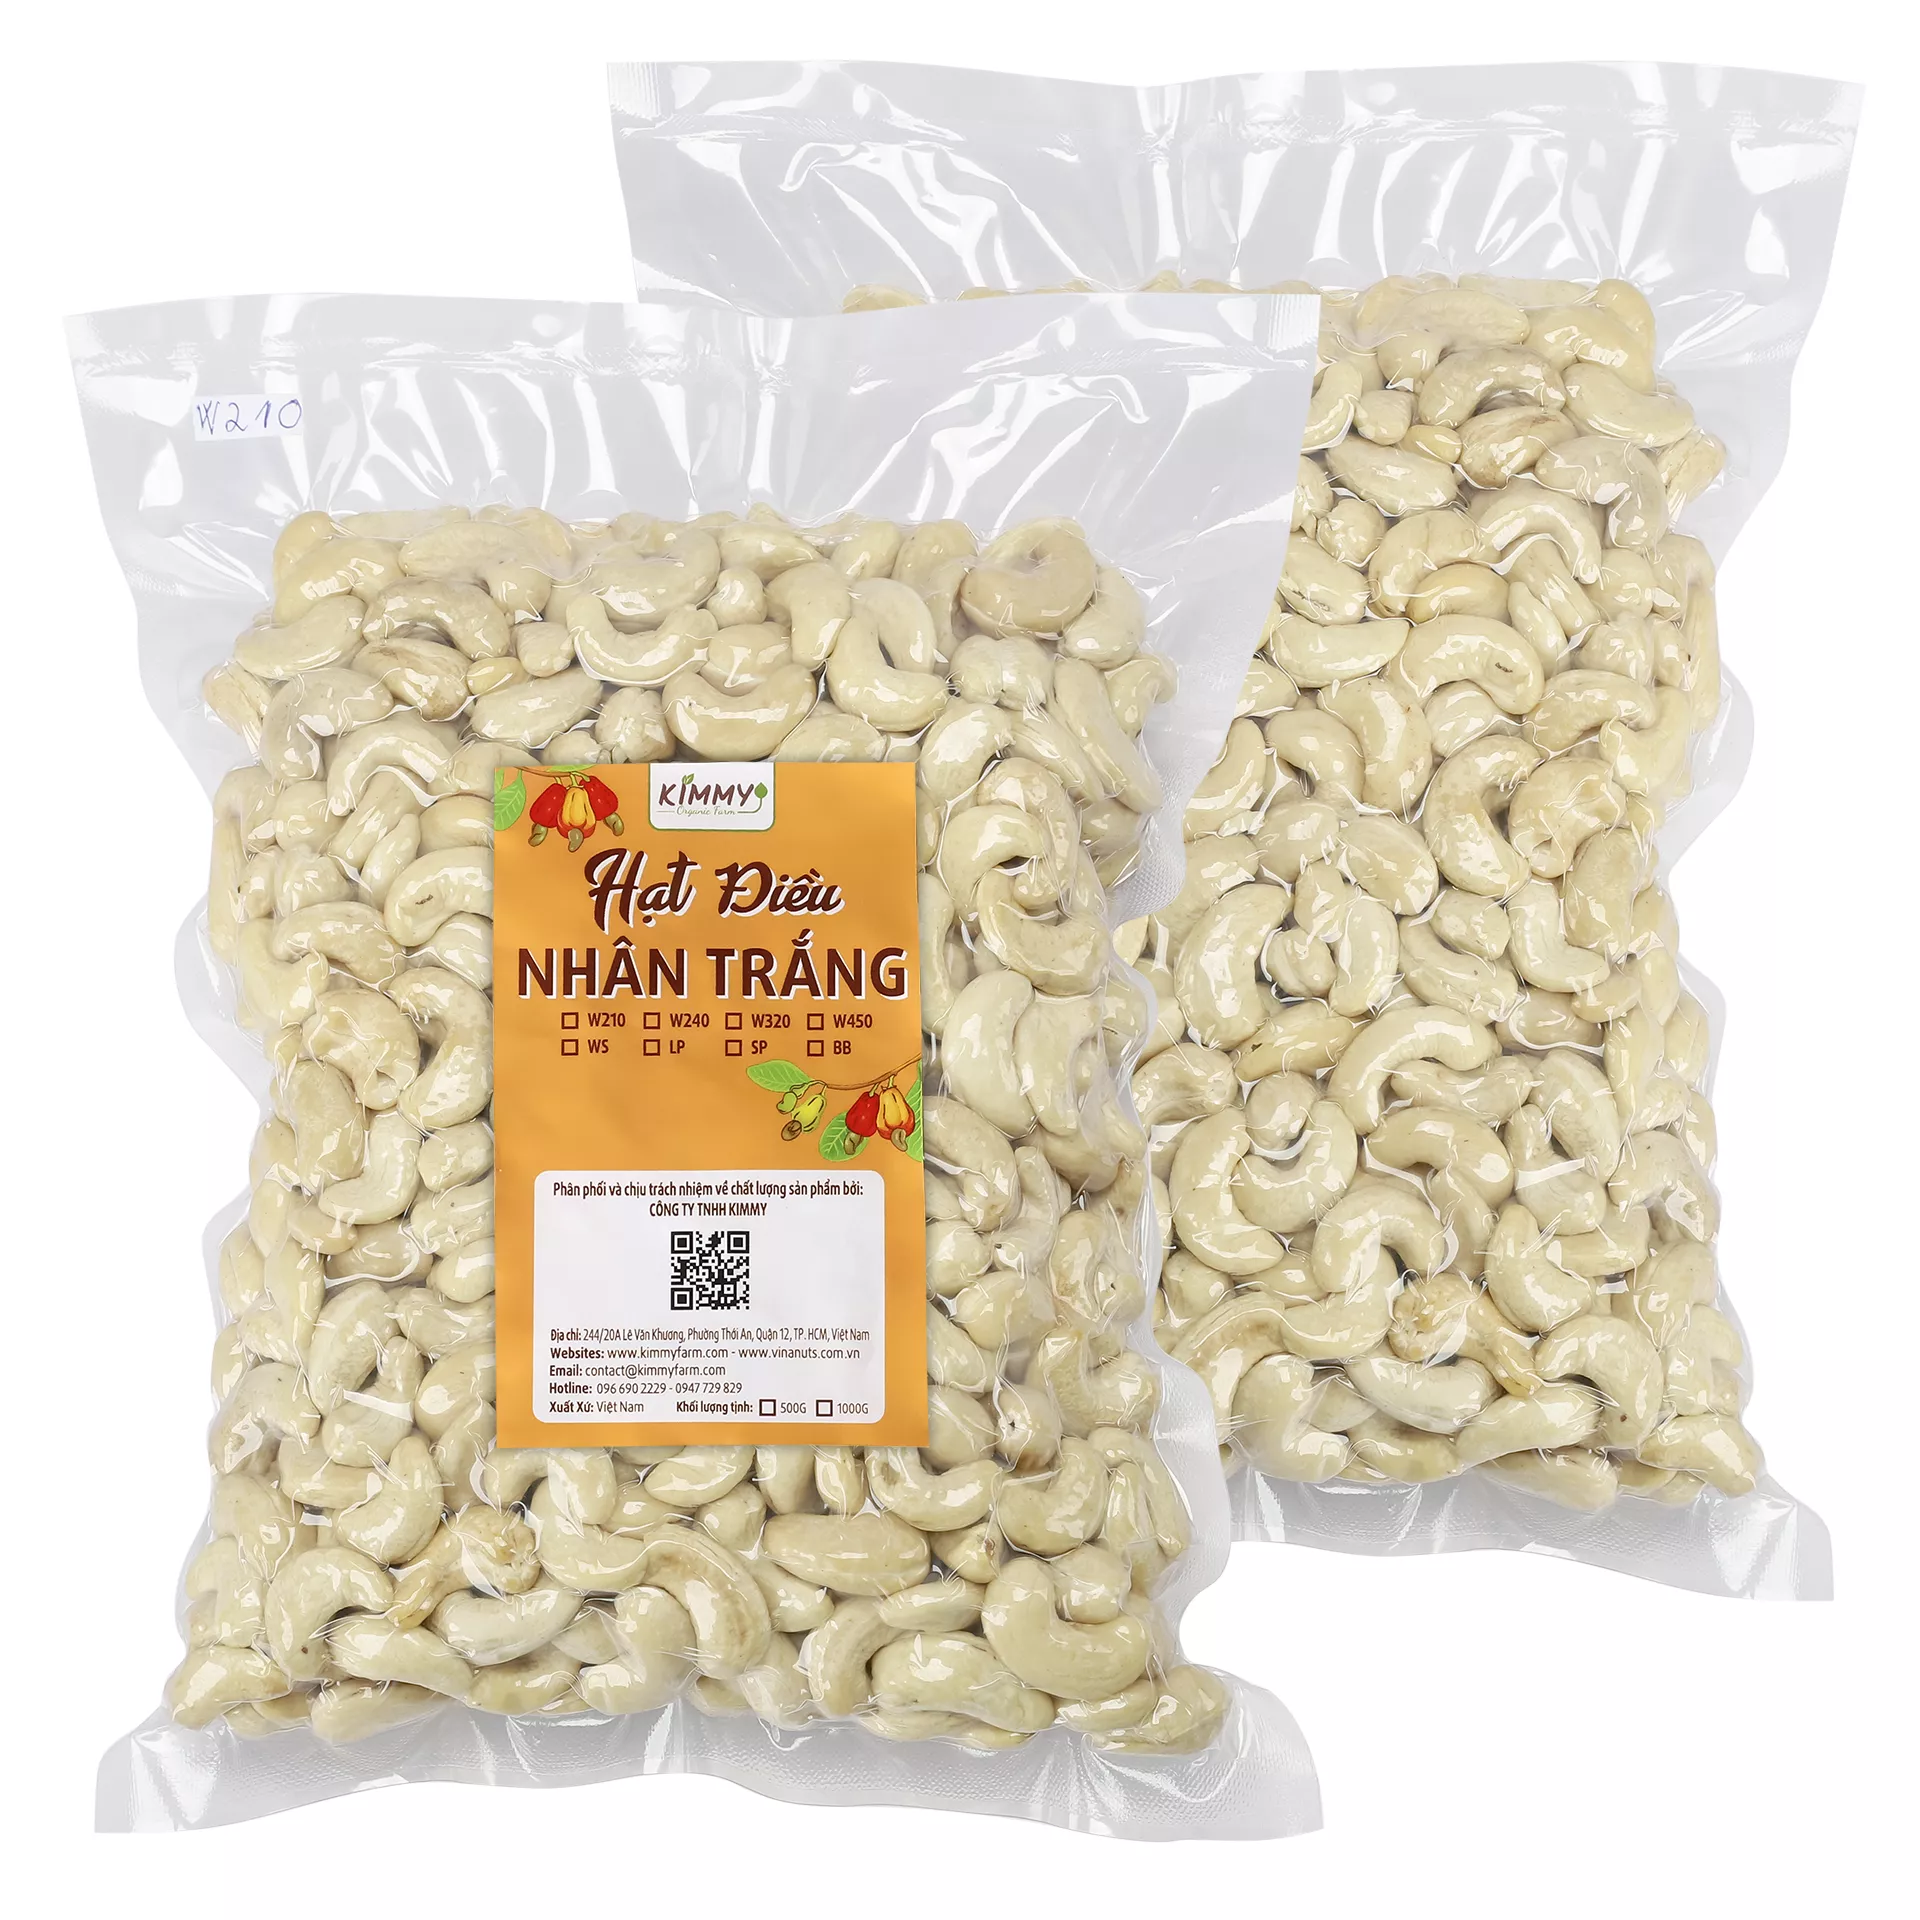 High-quality of Cashew nuts Packed 1KG Vaccum Bags - Vietnamese cashews are a kind of nut with high nutritional value!